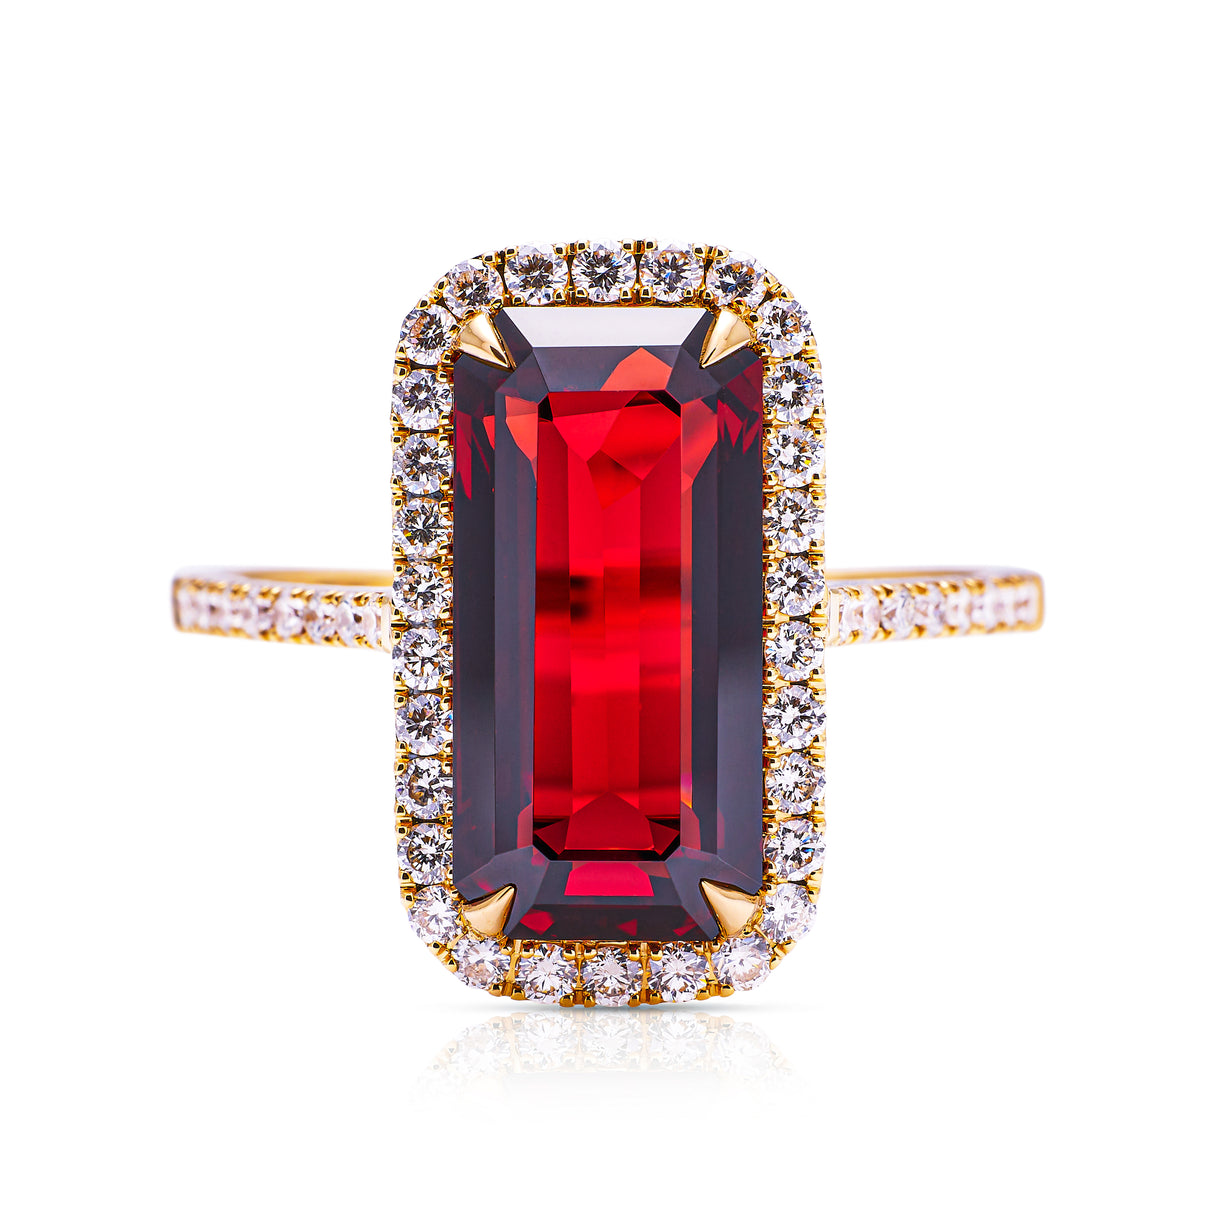 Garnet cluster ring, front view